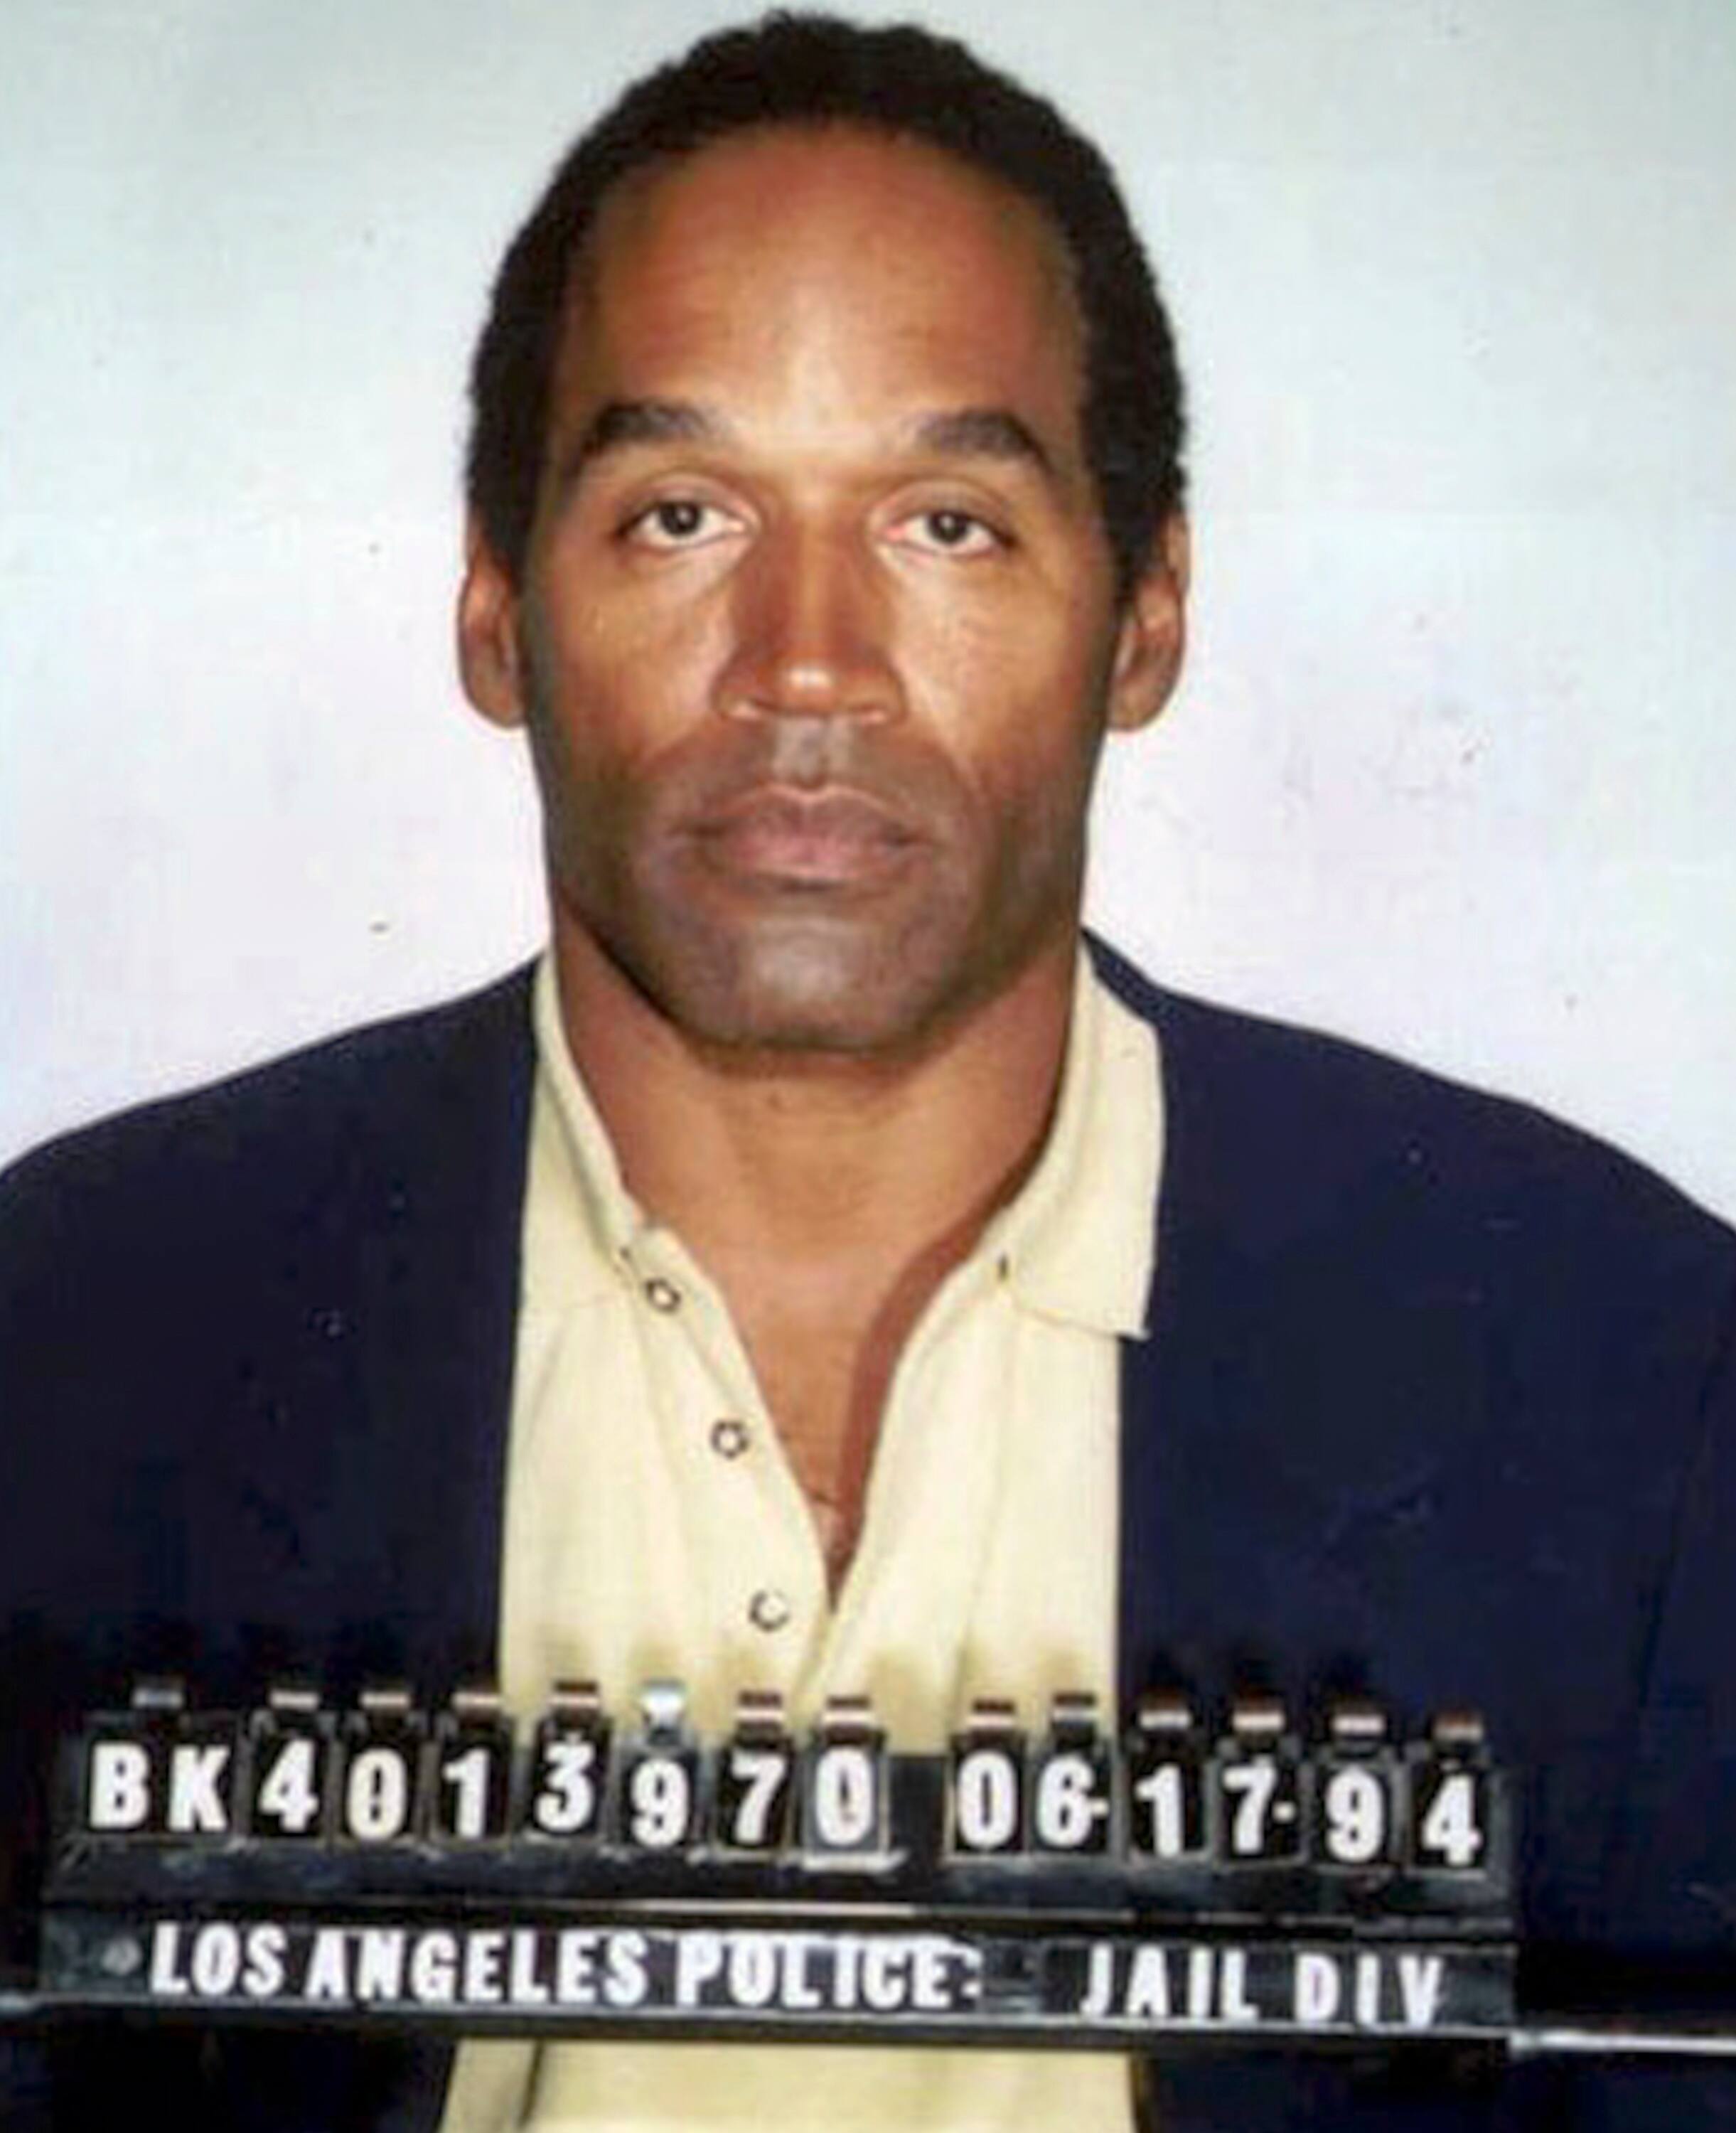 Famous American football star Simpson stood trial for the murder of his ex-wife and her friend in 1994. He was acquitted of criminal charges. (Source: Twitter)